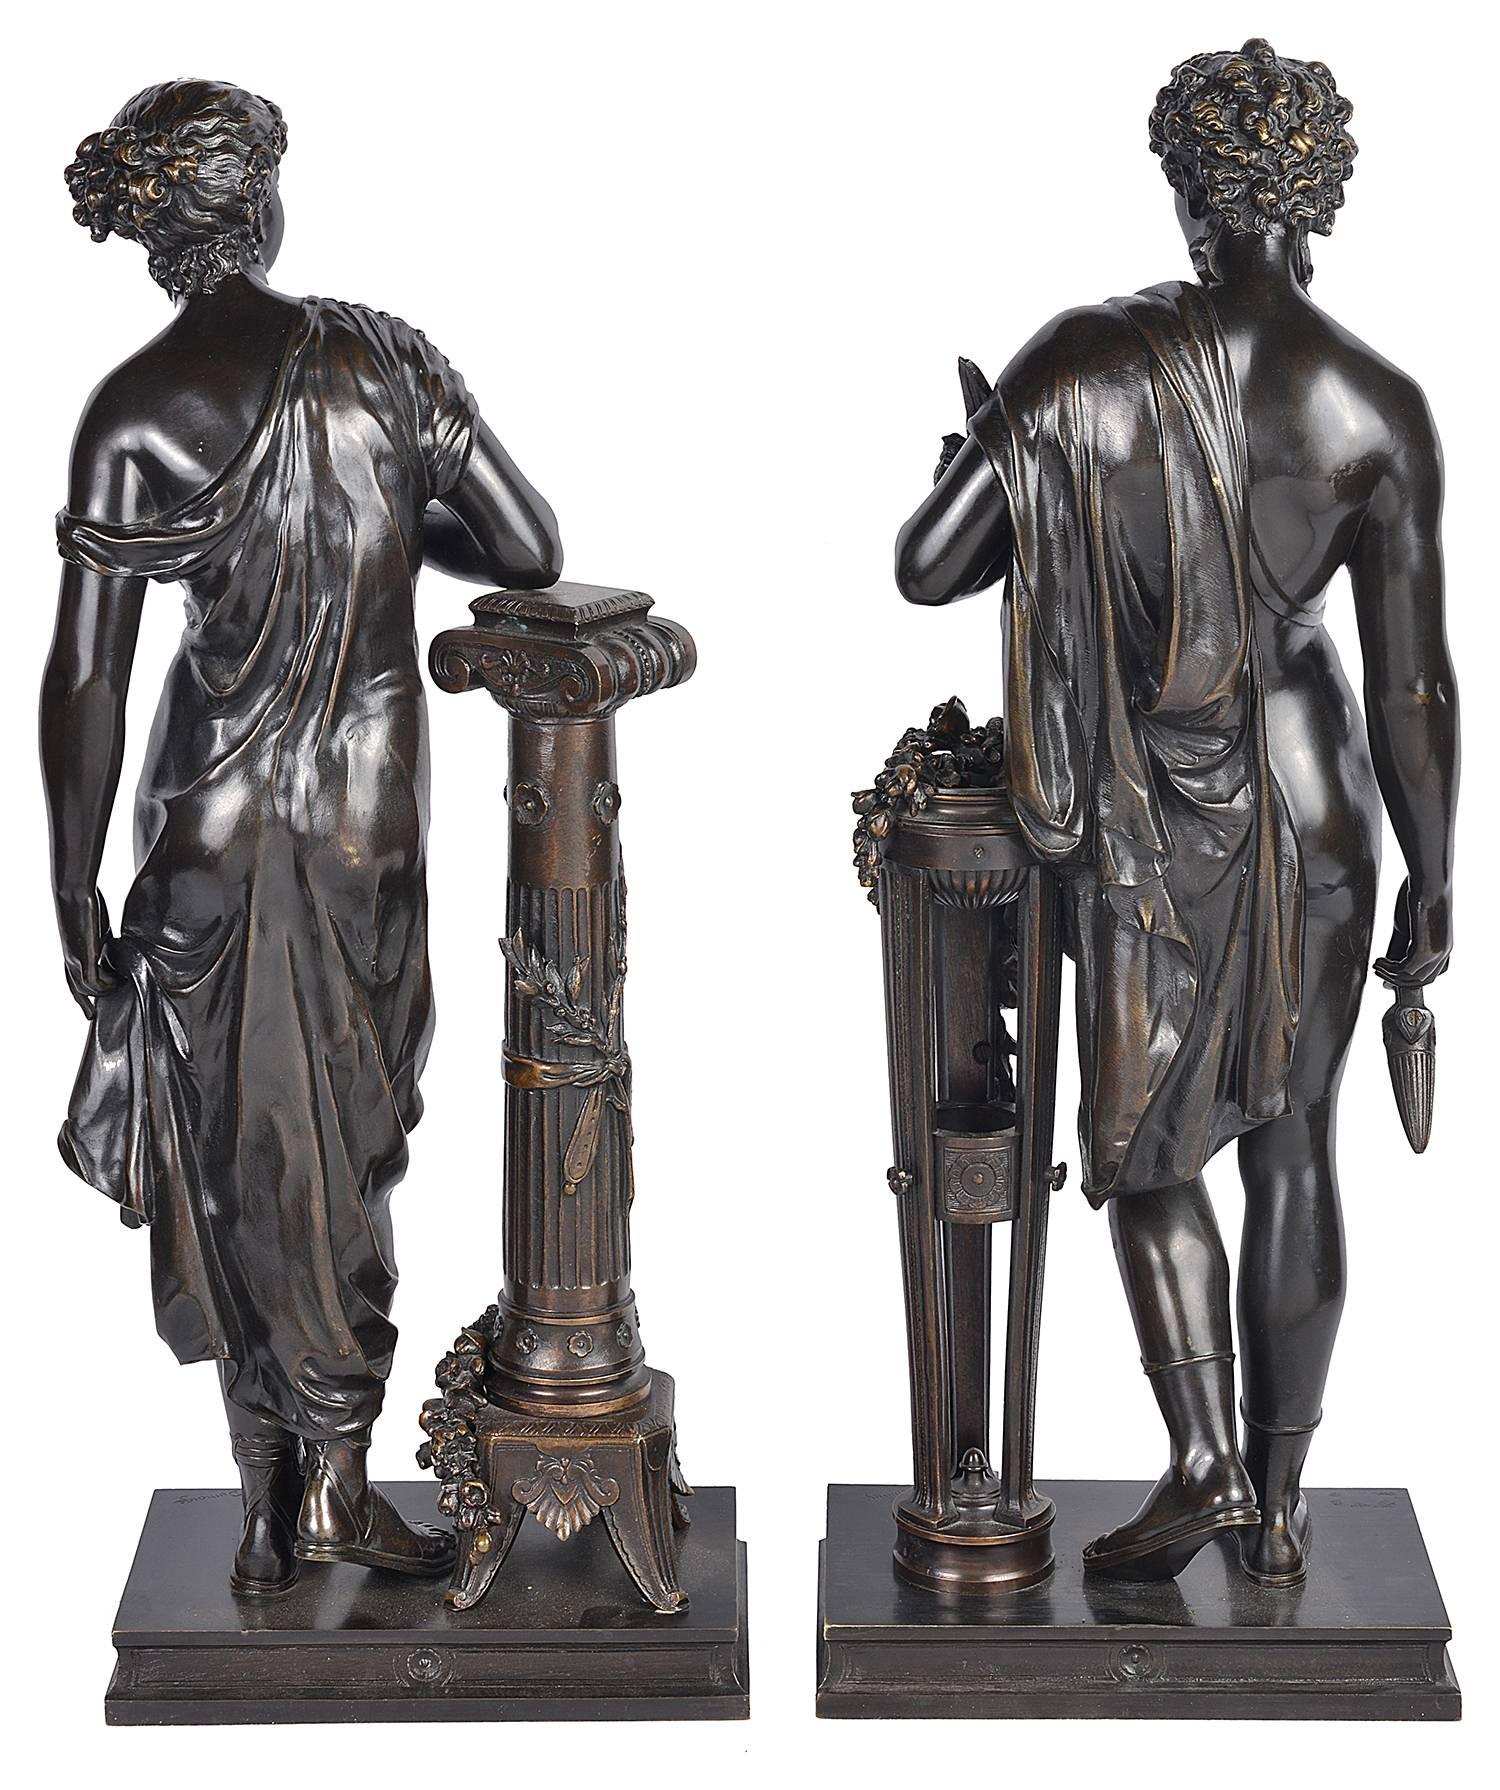 Pair of Classical Grecho Bronze Statues of Classical Females by Dumaige For Sale 2